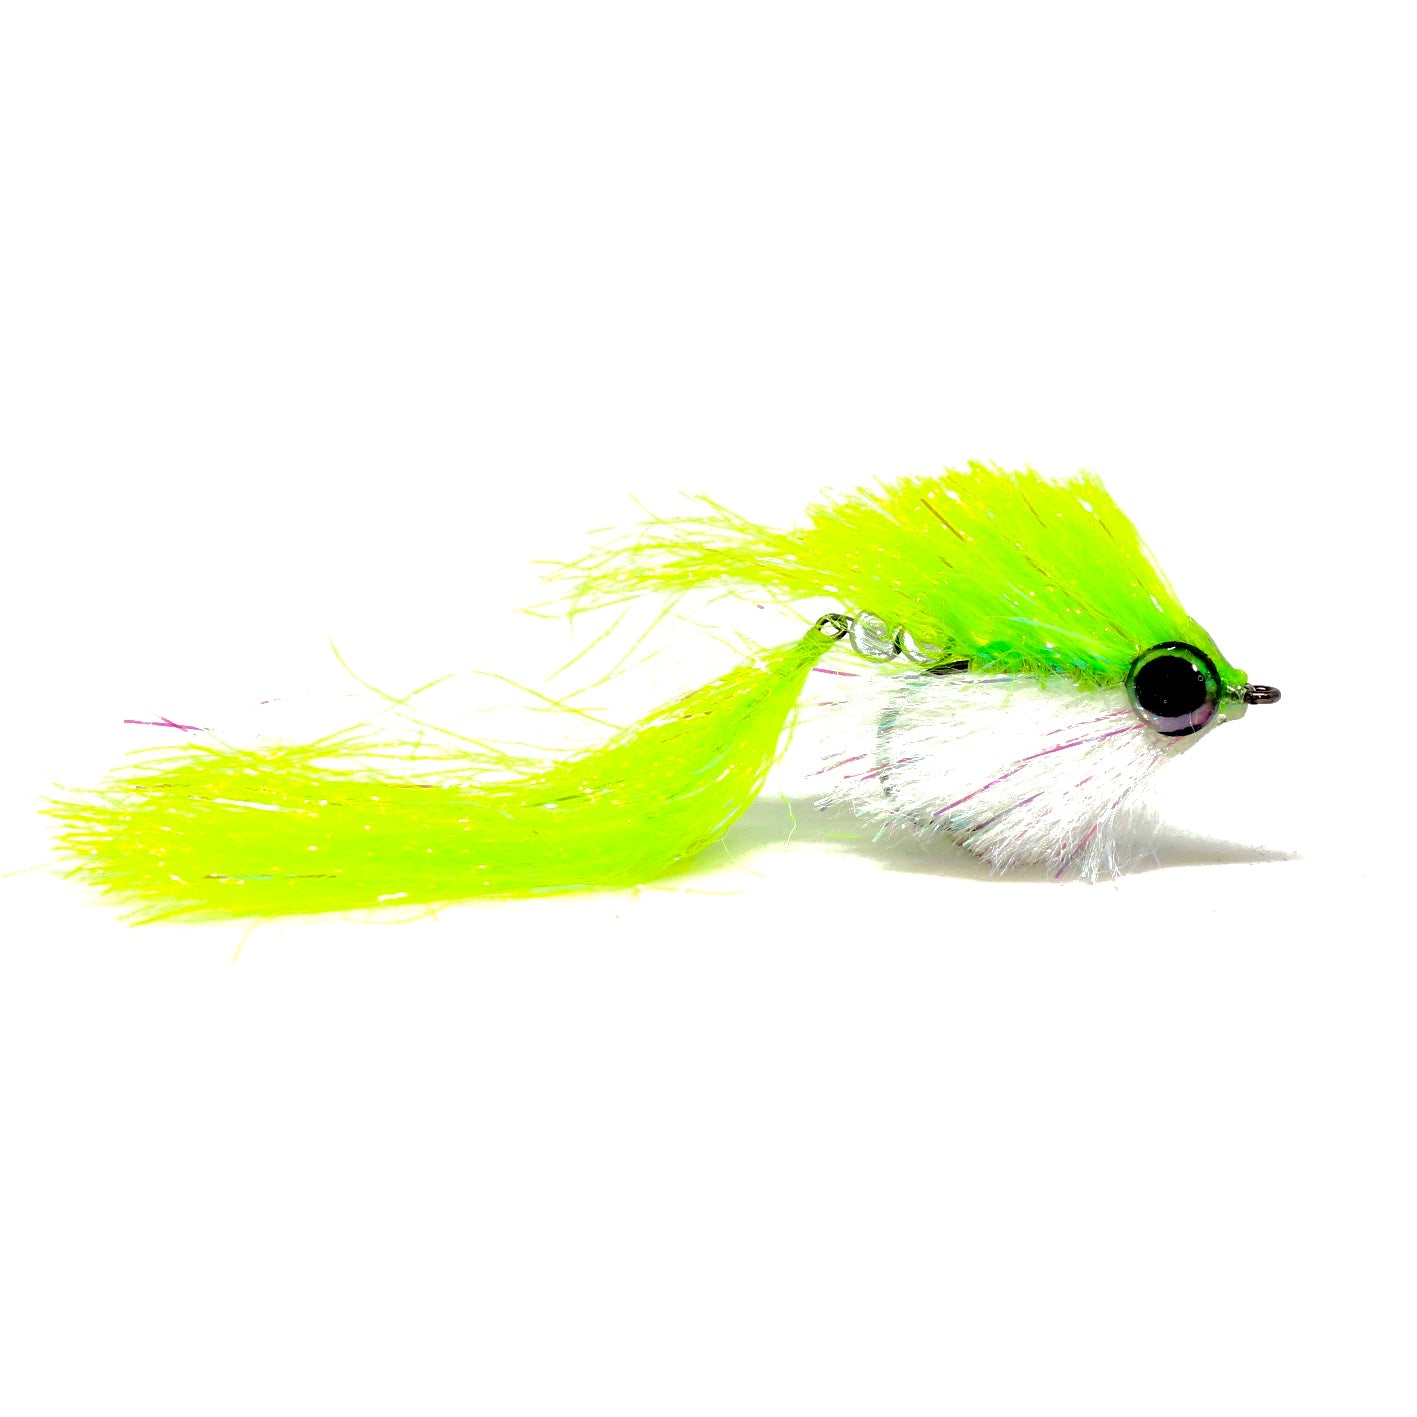 Jake's Pike Bait - Iron Bow Fly Shop